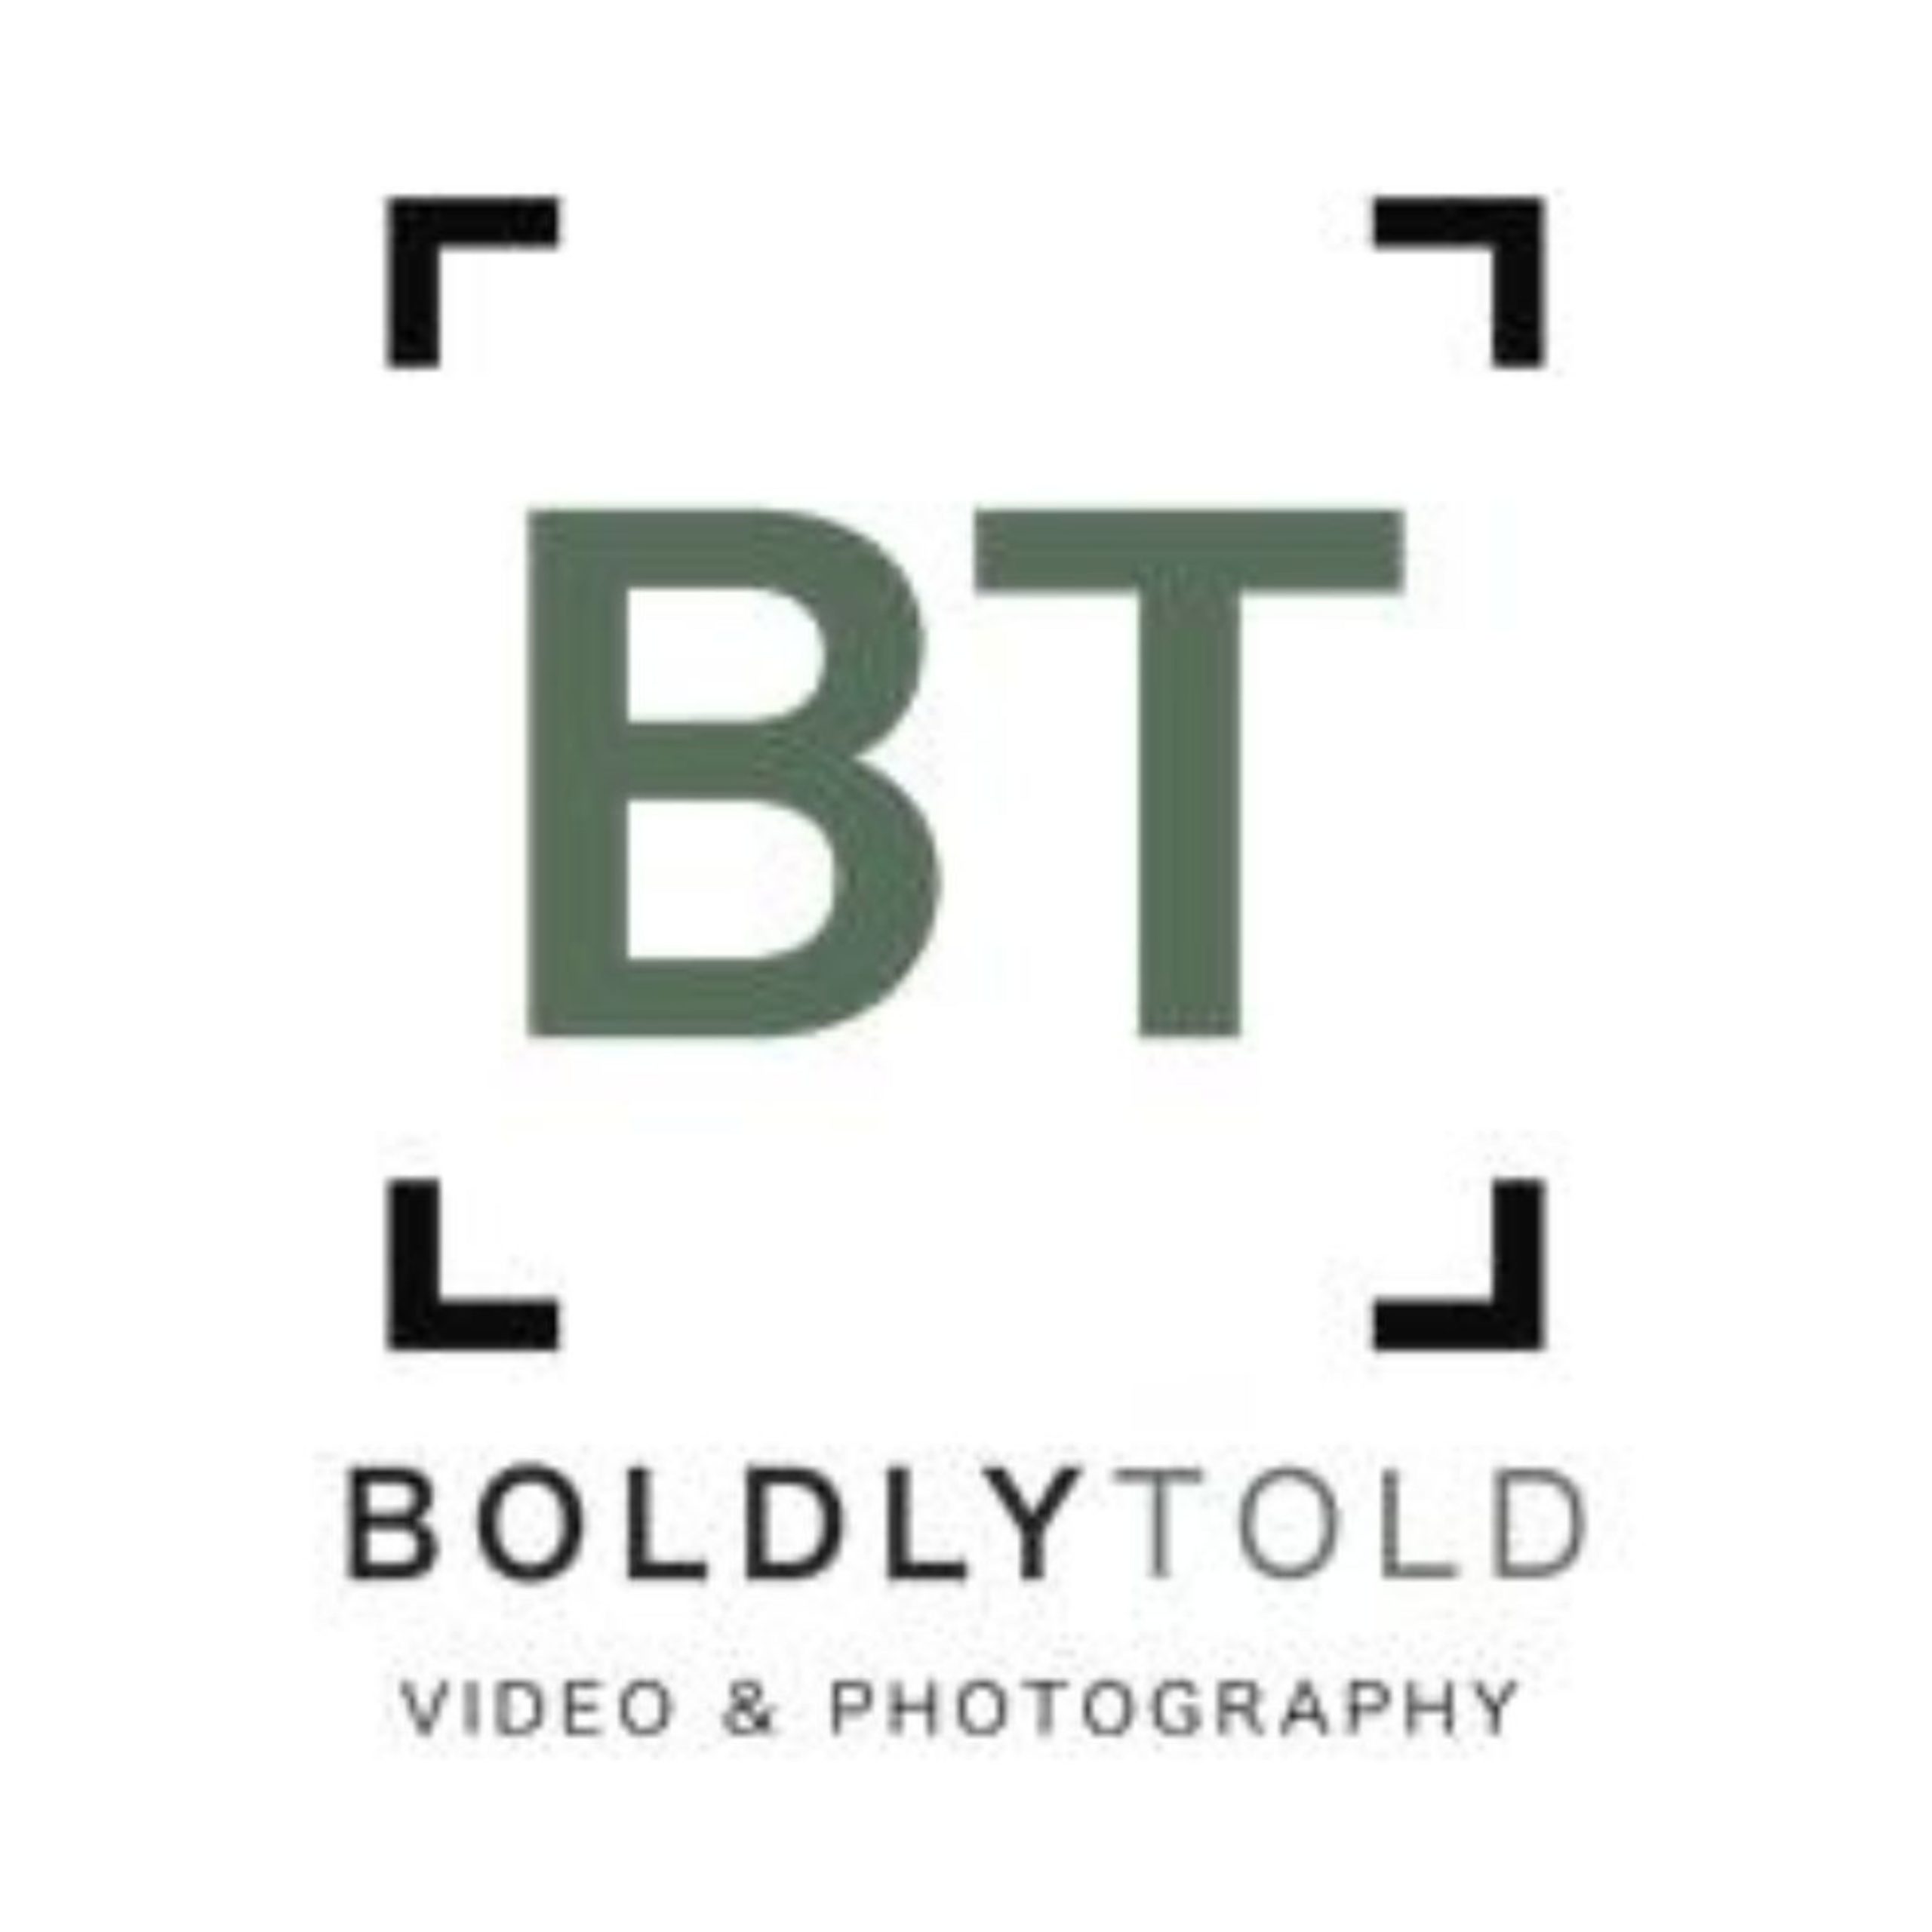 Boldly Told Video